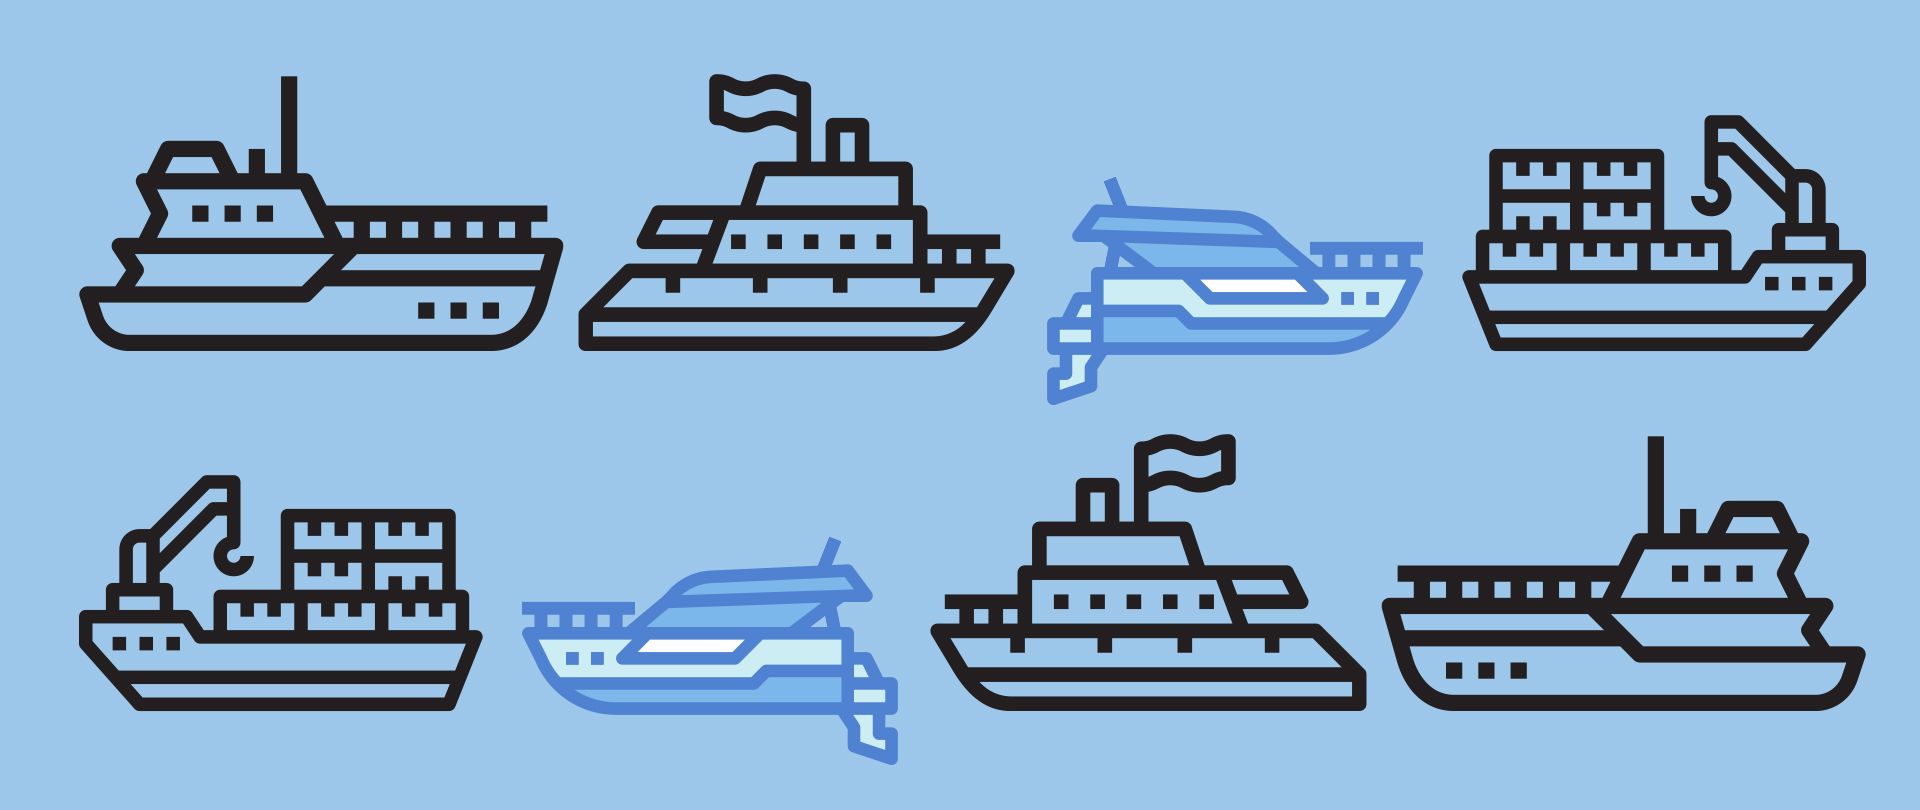 A Speedboat Mentality In A Sea Of Ships